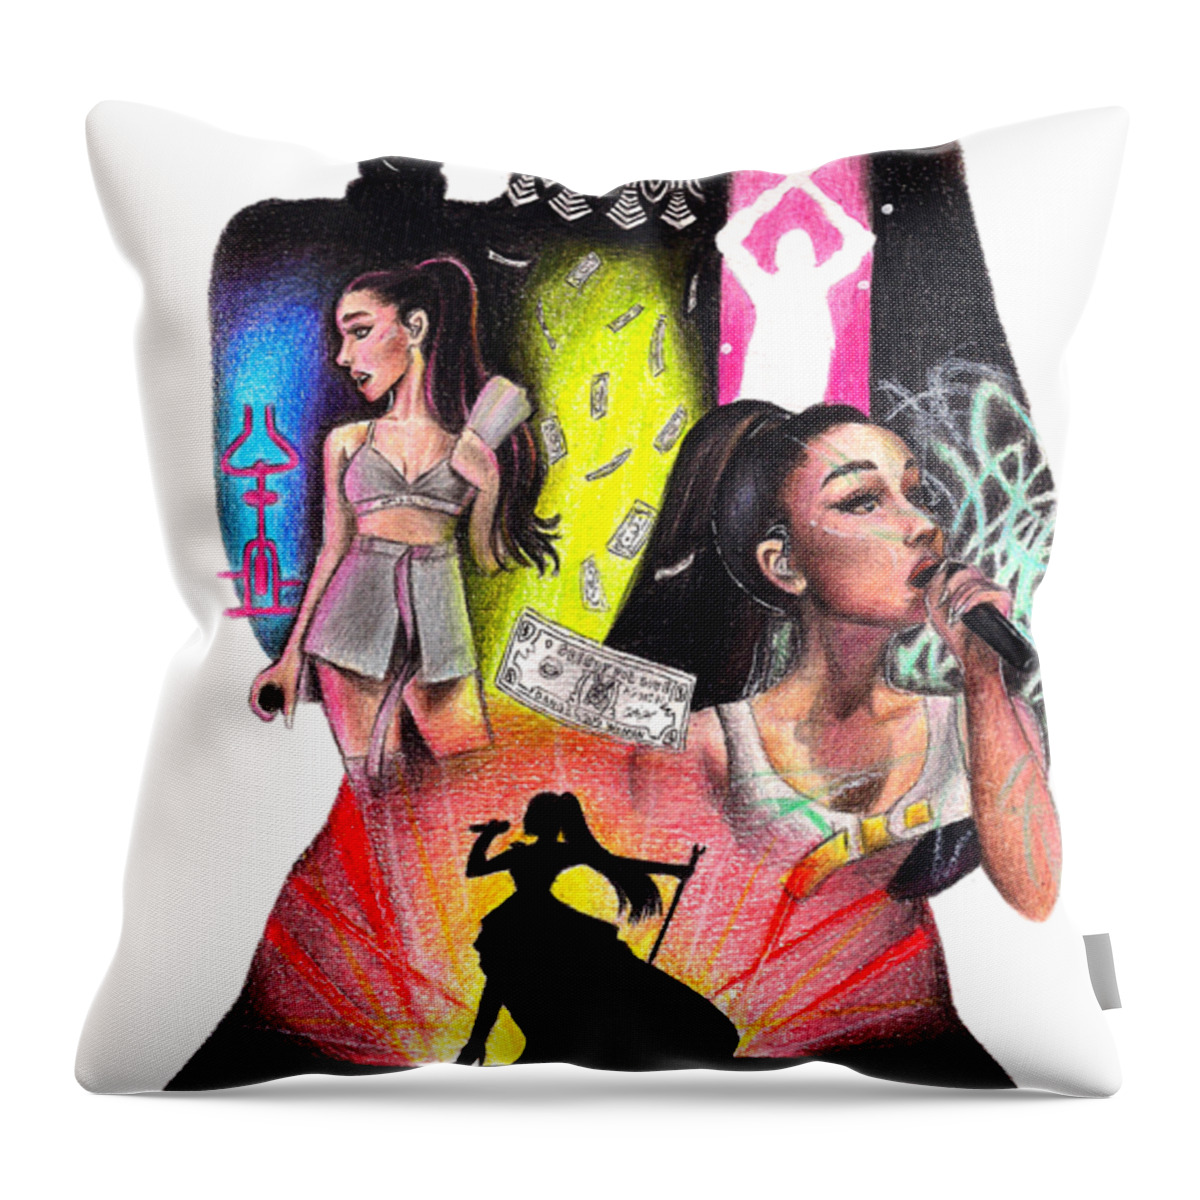 New Cool Ariana Grande Dangerous Woman Pillow Case Cover 20 x 30 Two Sides 